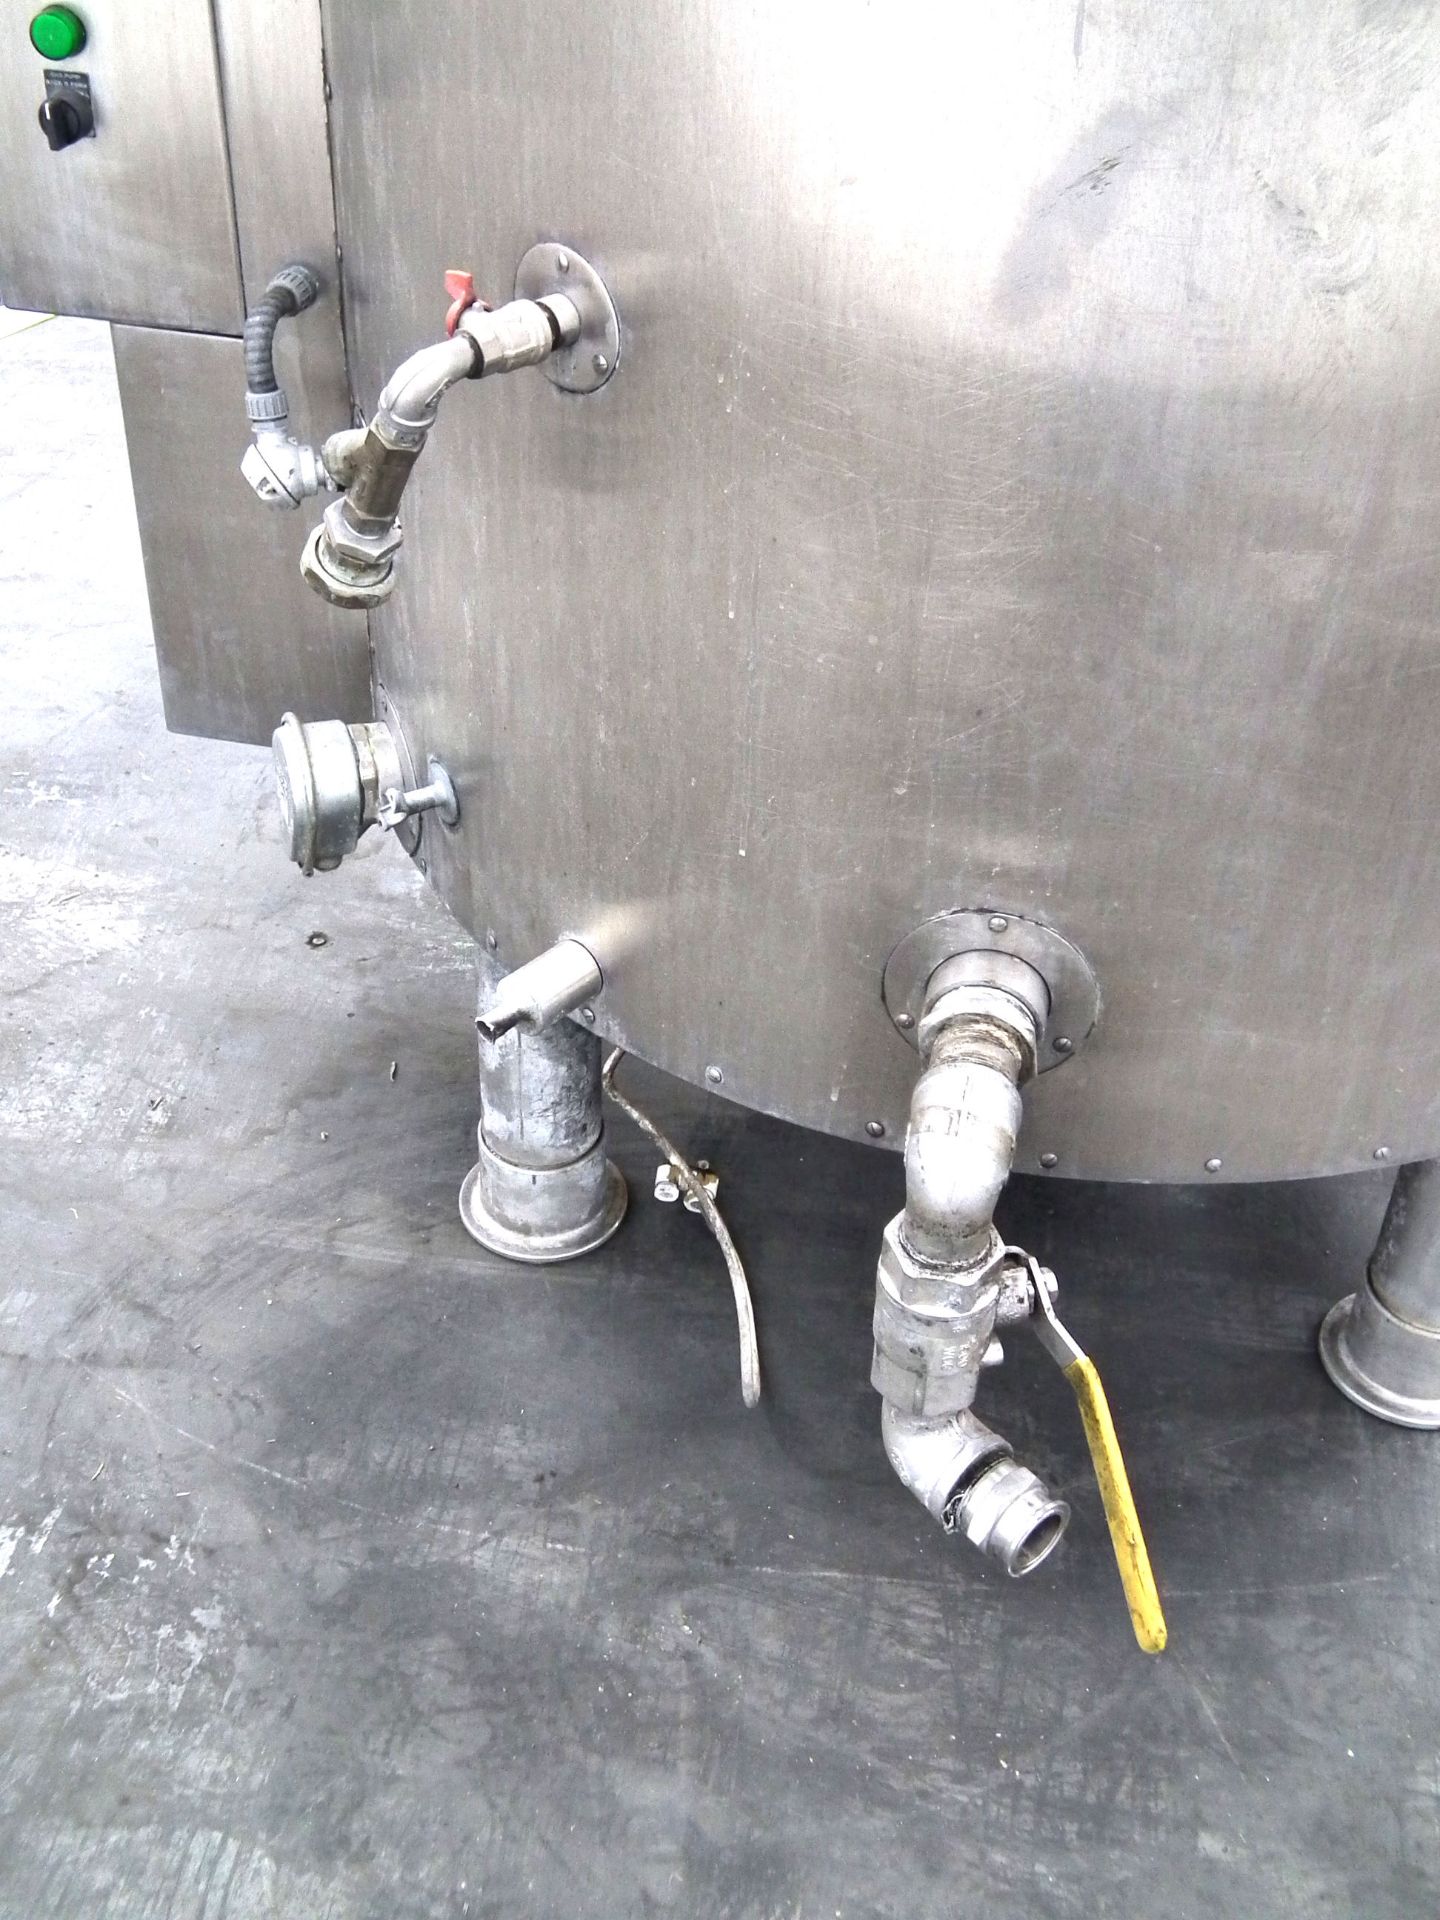 Stainless Steel Jacketed Mix Tank 160 Gallons E8465 - Image 5 of 10